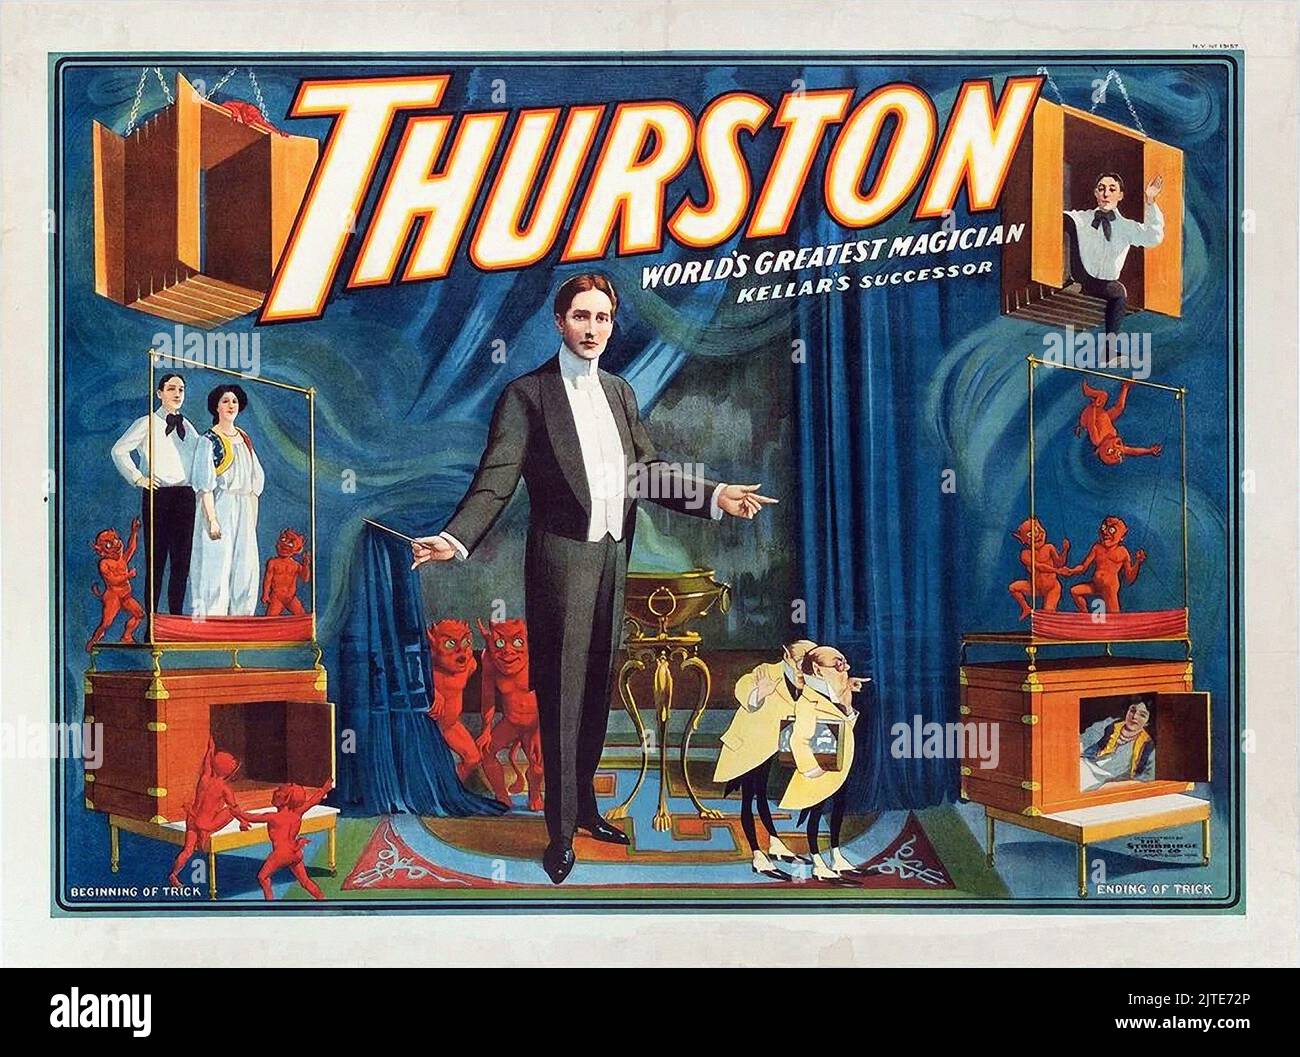 Vintage 1920s Magician Poster - Thurston The Great Magician Stock Photo